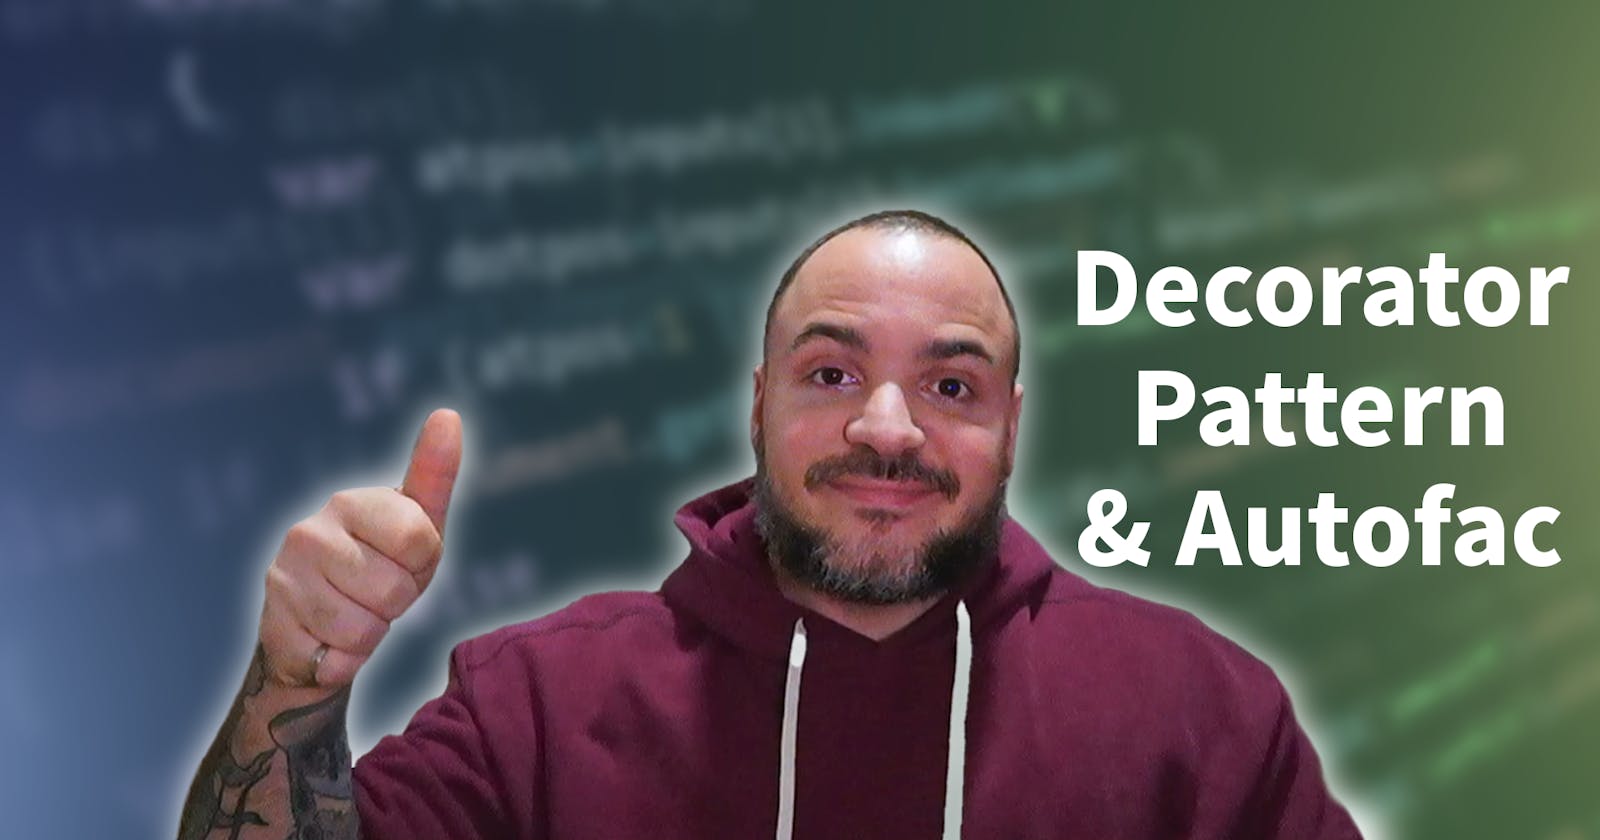 How To Implement The Decorator Pattern With Autofac